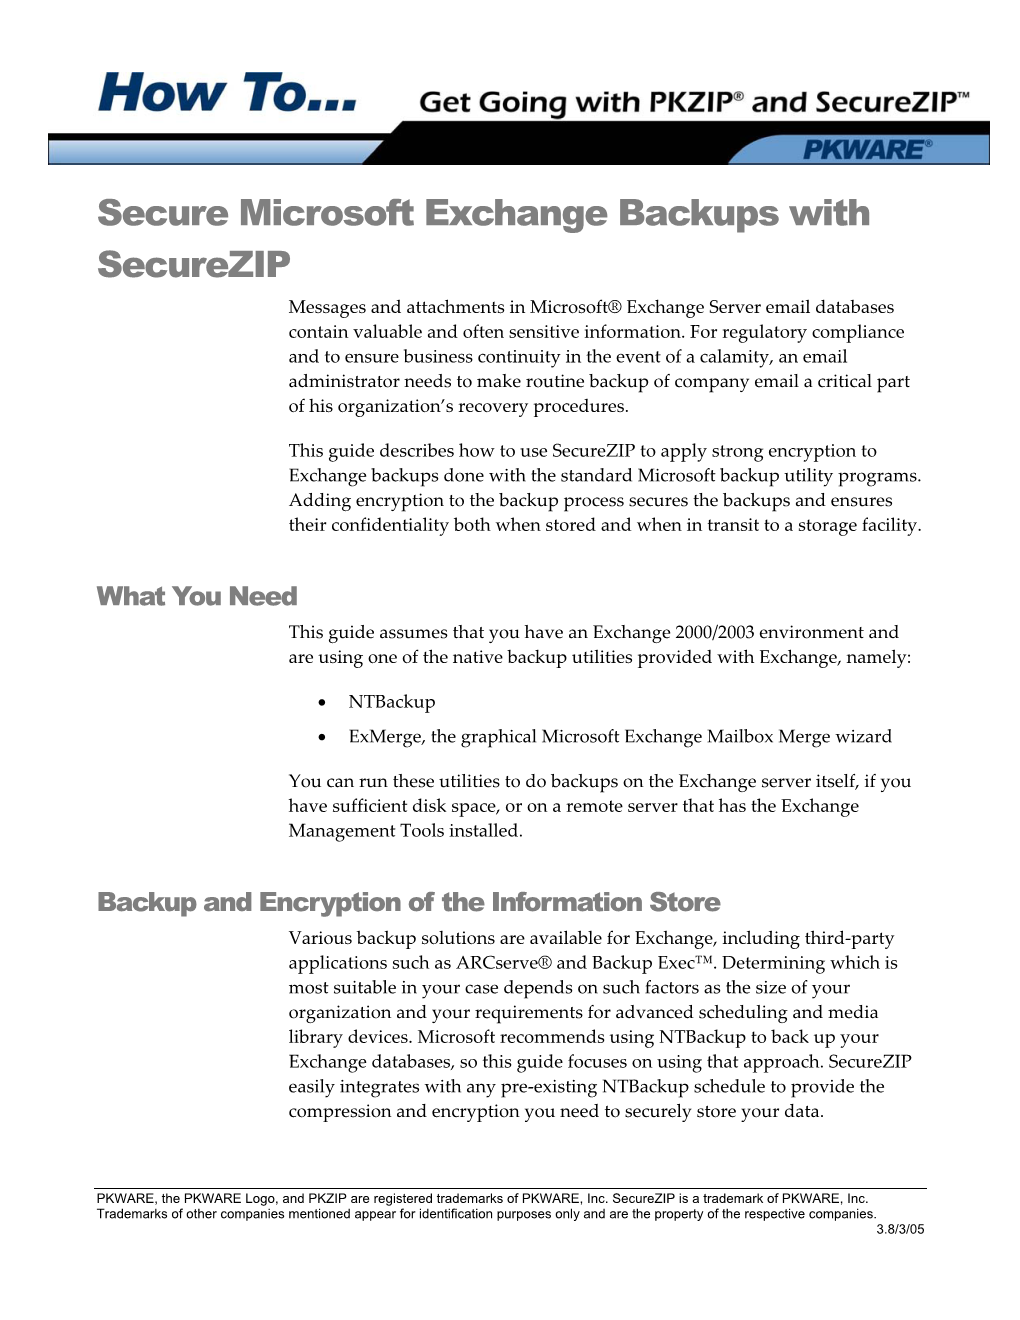 Secure Microsoft Exchange Backups with Securezip